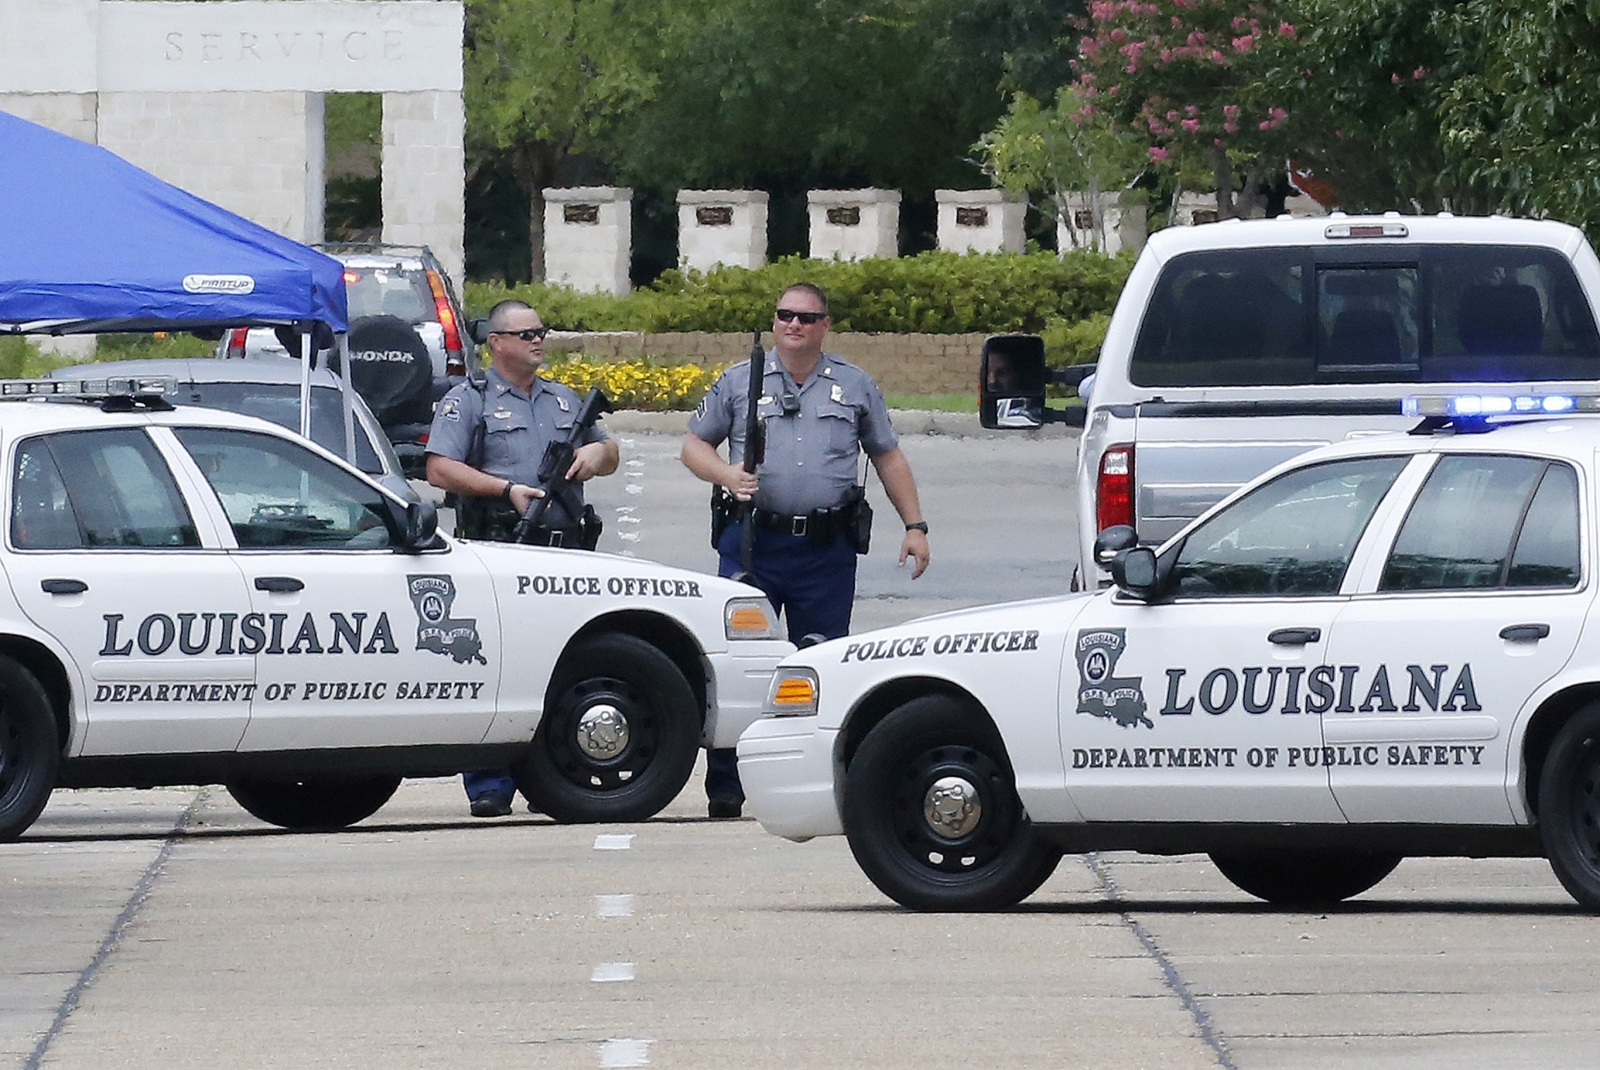 Baton Rouge shooting: What we know so far about the deadly assault on police